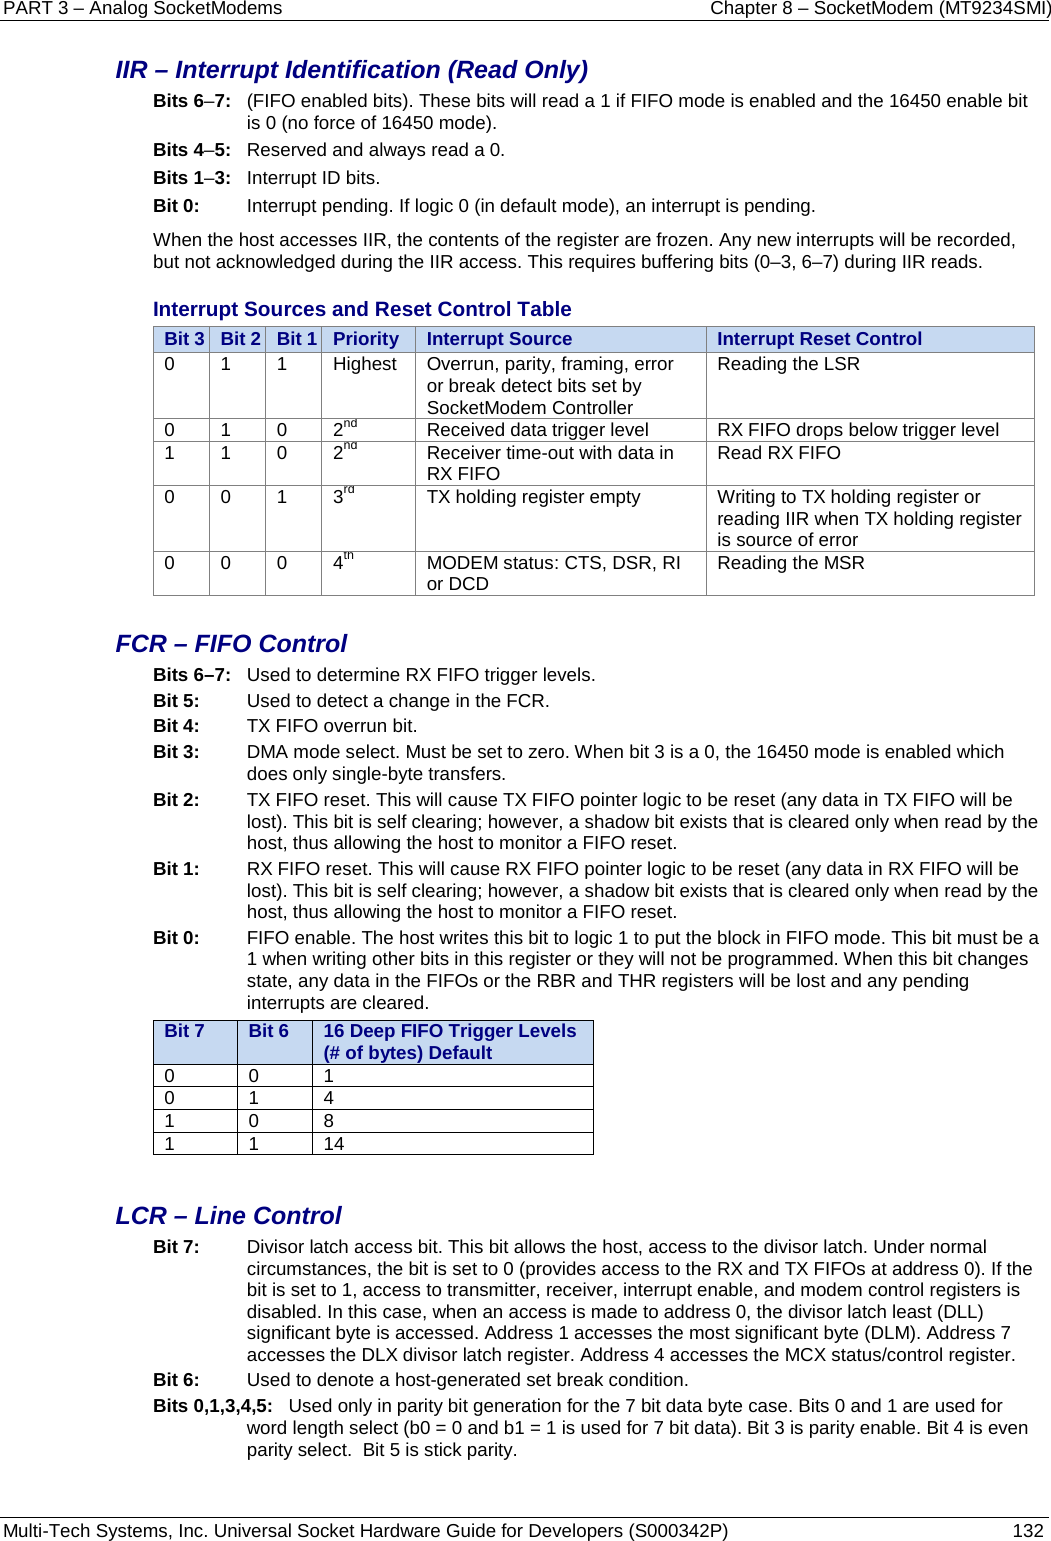 PART 3 – Analog SocketModems Chapter 8 – SocketModem (MT9234SMI) Multi-Tech Systems, Inc. Universal Socket Hardware Guide for Developers (S000342P)  132  IIR – Interrupt Identification (Read Only) Bits 6–7: (FIFO enabled bits). These bits will read a 1 if FIFO mode is enabled and the 16450 enable bit is 0 (no force of 16450 mode). Bits 4–5: Reserved and always read a 0. Bits 1–3: Interrupt ID bits. Bit 0:  Interrupt pending. If logic 0 (in default mode), an interrupt is pending.  When the host accesses IIR, the contents of the register are frozen. Any new interrupts will be recorded, but not acknowledged during the IIR access. This requires buffering bits (0–3, 6–7) during IIR reads. Interrupt Sources and Reset Control Table Bit 3 Bit 2 Bit 1 Priority Interrupt Source Interrupt Reset Control 0 1 1 Highest Overrun, parity, framing, error or break detect bits set by SocketModem Controller Reading the LSR 0 1 0 2nd Received data trigger level RX FIFO drops below trigger level 1  1  0  2nd Receiver time-out with data in RX FIFO Read RX FIFO 0 0 1 3rd TX holding register empty Writing to TX holding register or reading IIR when TX holding register is source of error 0 0 0 4th MODEM status: CTS, DSR, RI or DCD Reading the MSR  FCR – FIFO Control Bits 6–7: Used to determine RX FIFO trigger levels. Bit 5: Used to detect a change in the FCR. Bit 4:   TX FIFO overrun bit. Bit 3:  DMA mode select. Must be set to zero. When bit 3 is a 0, the 16450 mode is enabled which does only single-byte transfers.  Bit 2:  TX FIFO reset. This will cause TX FIFO pointer logic to be reset (any data in TX FIFO will be lost). This bit is self clearing; however, a shadow bit exists that is cleared only when read by the host, thus allowing the host to monitor a FIFO reset. Bit 1:  RX FIFO reset. This will cause RX FIFO pointer logic to be reset (any data in RX FIFO will be lost). This bit is self clearing; however, a shadow bit exists that is cleared only when read by the host, thus allowing the host to monitor a FIFO reset. Bit 0:  FIFO enable. The host writes this bit to logic 1 to put the block in FIFO mode. This bit must be a 1 when writing other bits in this register or they will not be programmed. When this bit changes state, any data in the FIFOs or the RBR and THR registers will be lost and any pending interrupts are cleared. Bit 7 Bit 6 16 Deep FIFO Trigger Levels  (# of bytes) Default 0 0 1 0 1 4 1 0 8 1 1 14  LCR – Line Control Bit 7:  Divisor latch access bit. This bit allows the host, access to the divisor latch. Under normal circumstances, the bit is set to 0 (provides access to the RX and TX FIFOs at address 0). If the bit is set to 1, access to transmitter, receiver, interrupt enable, and modem control registers is disabled. In this case, when an access is made to address 0, the divisor latch least (DLL) significant byte is accessed. Address 1 accesses the most significant byte (DLM). Address 7 accesses the DLX divisor latch register. Address 4 accesses the MCX status/control register. Bit 6:  Used to denote a host-generated set break condition. Bits 0,1,3,4,5:   Used only in parity bit generation for the 7 bit data byte case. Bits 0 and 1 are used for word length select (b0 = 0 and b1 = 1 is used for 7 bit data). Bit 3 is parity enable. Bit 4 is even parity select.  Bit 5 is stick parity.    